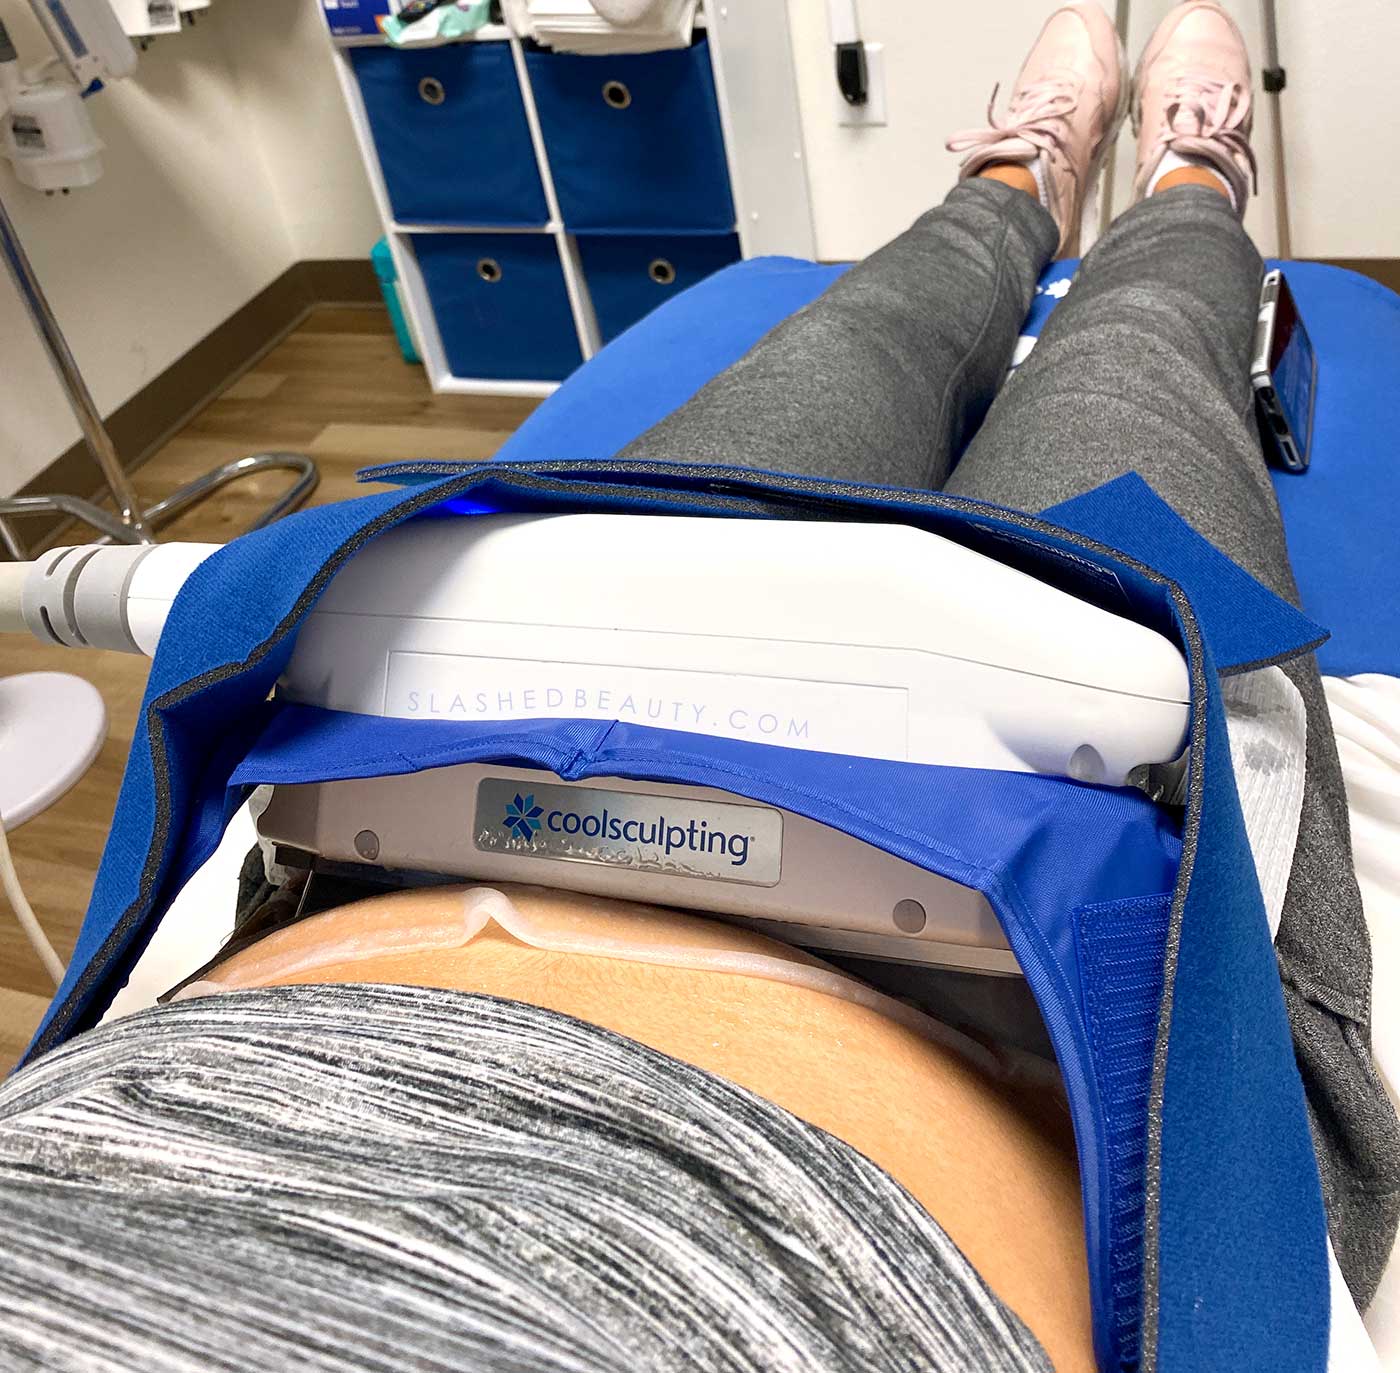 Coolsculpting the lower belly | Coolsculpting Before & After, How Much Does It Cost, How Long Does it Take? | Slashed Beauty